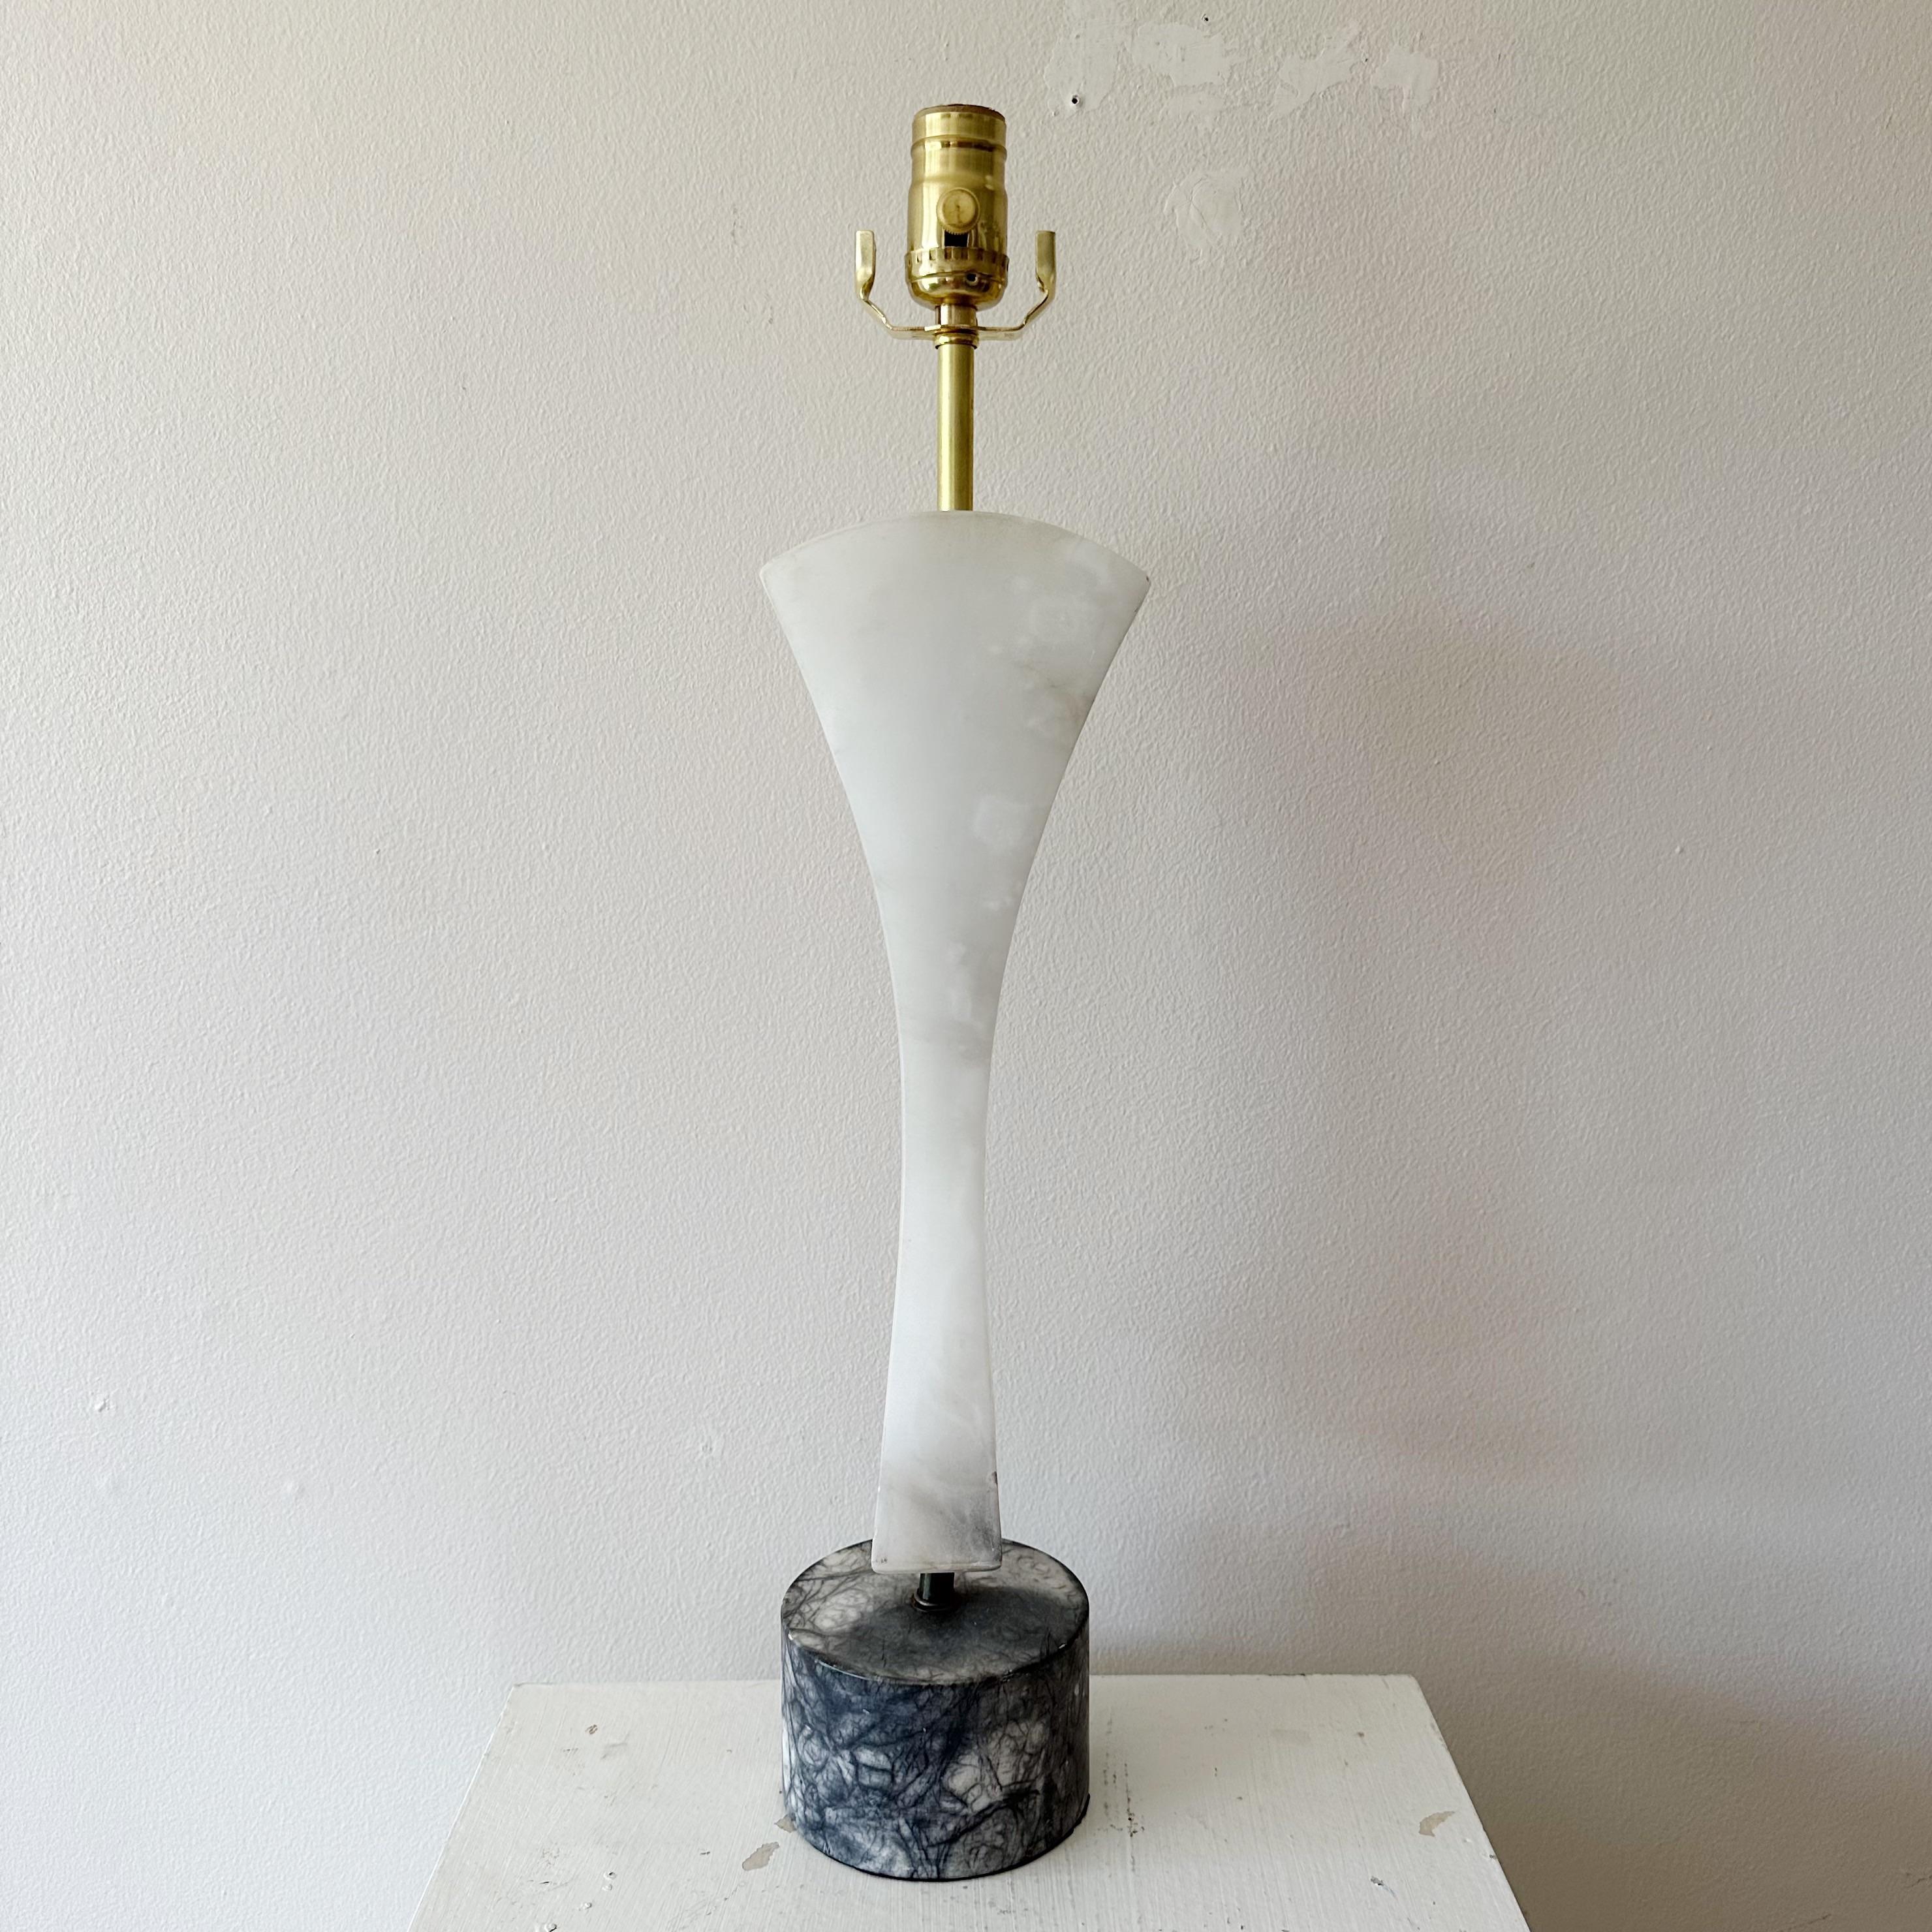 Sculptural mid 20th century alabaster table lamp from the 1950s. A great sculptural design with the centerpiece being in white alabaster and the base in black and white alabaster. Probably Italian. Professionally rewired with new fittings and a